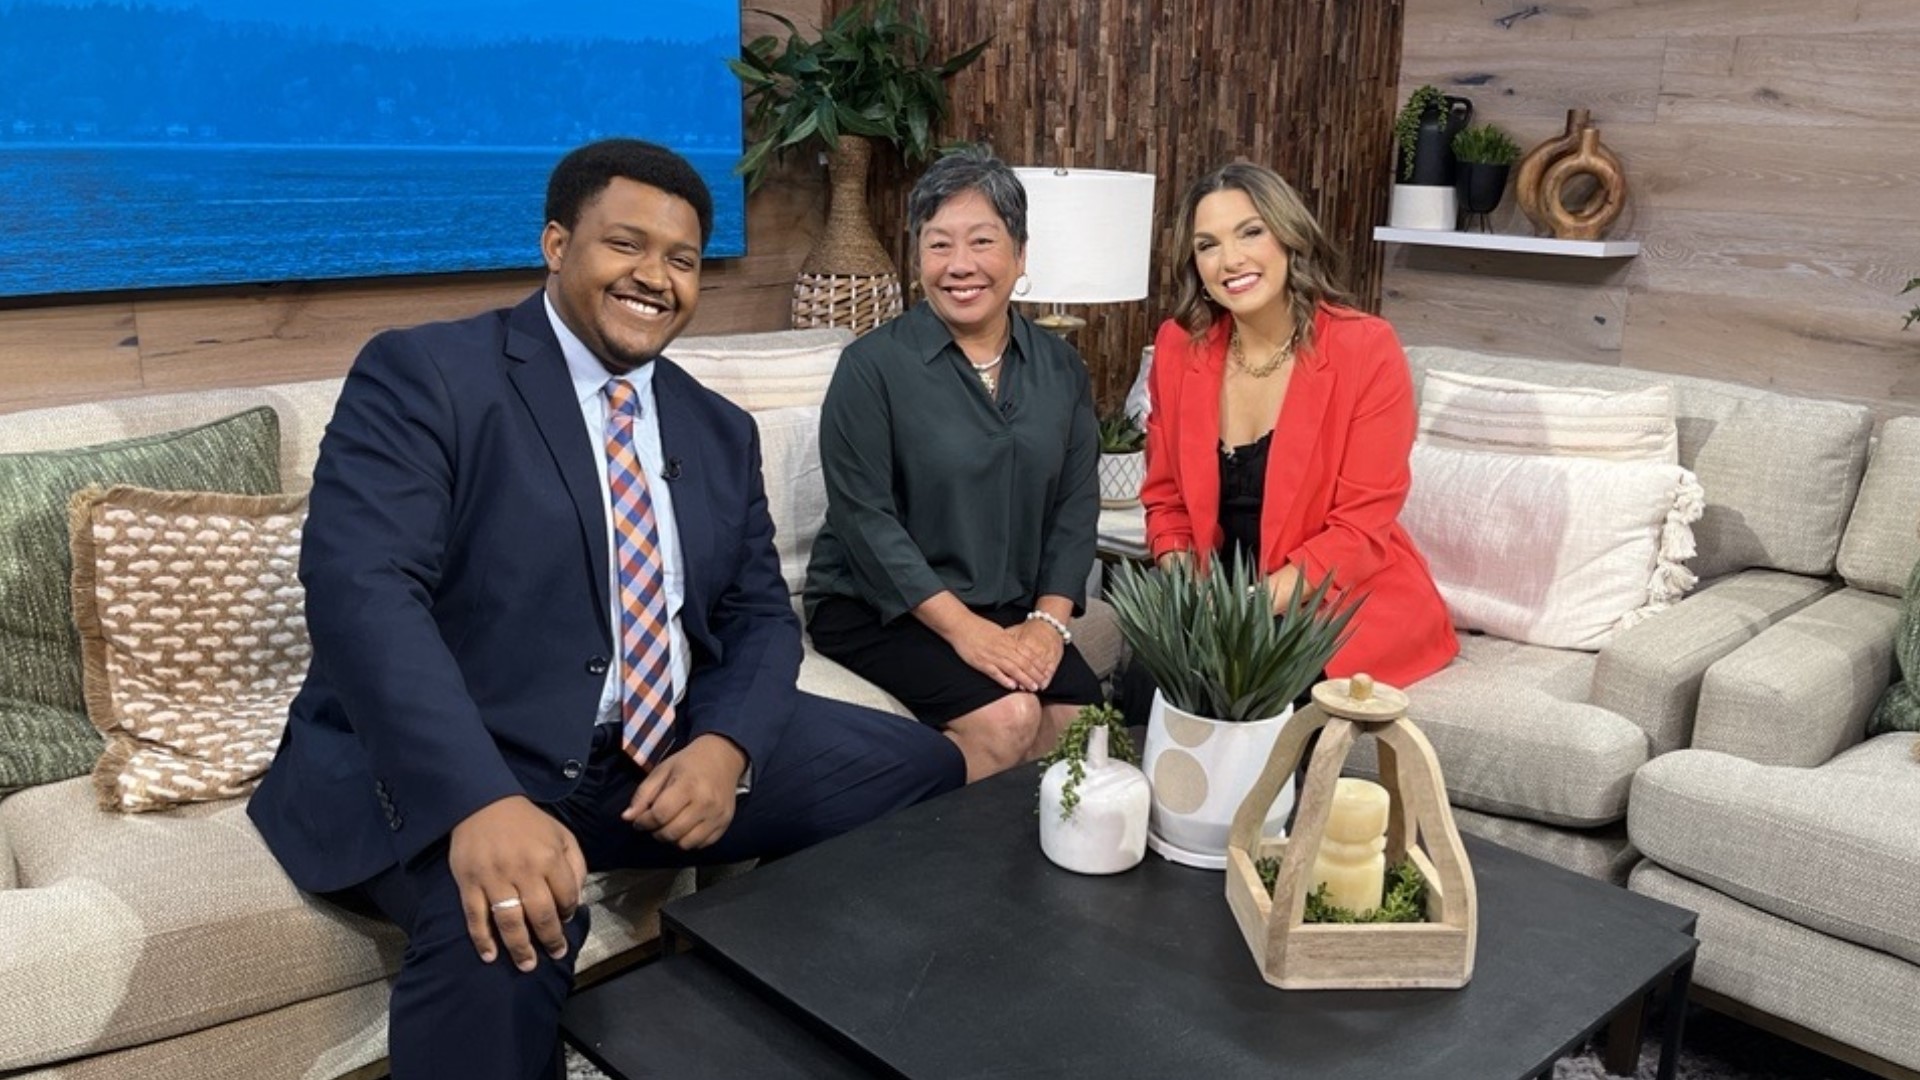 AARP's Marguerite Ro and Habitat for Humanity's Cliff Cawthon discuss ways to make homes and apartments more accessible for older residents. Sponsored by AARP.